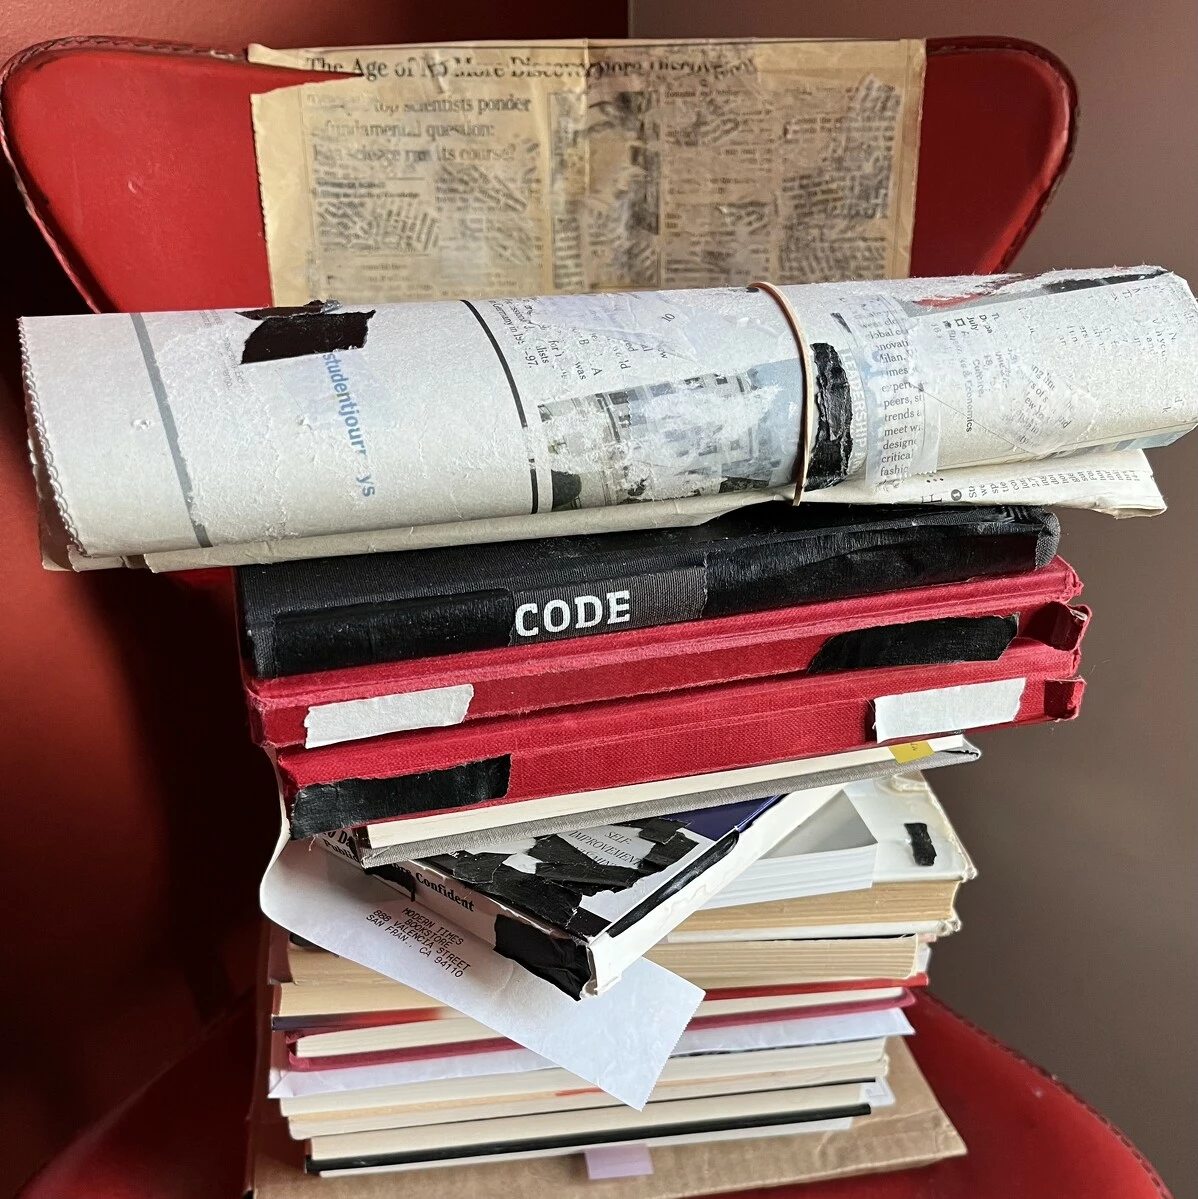 A red chair piled high with books and paper ephemera